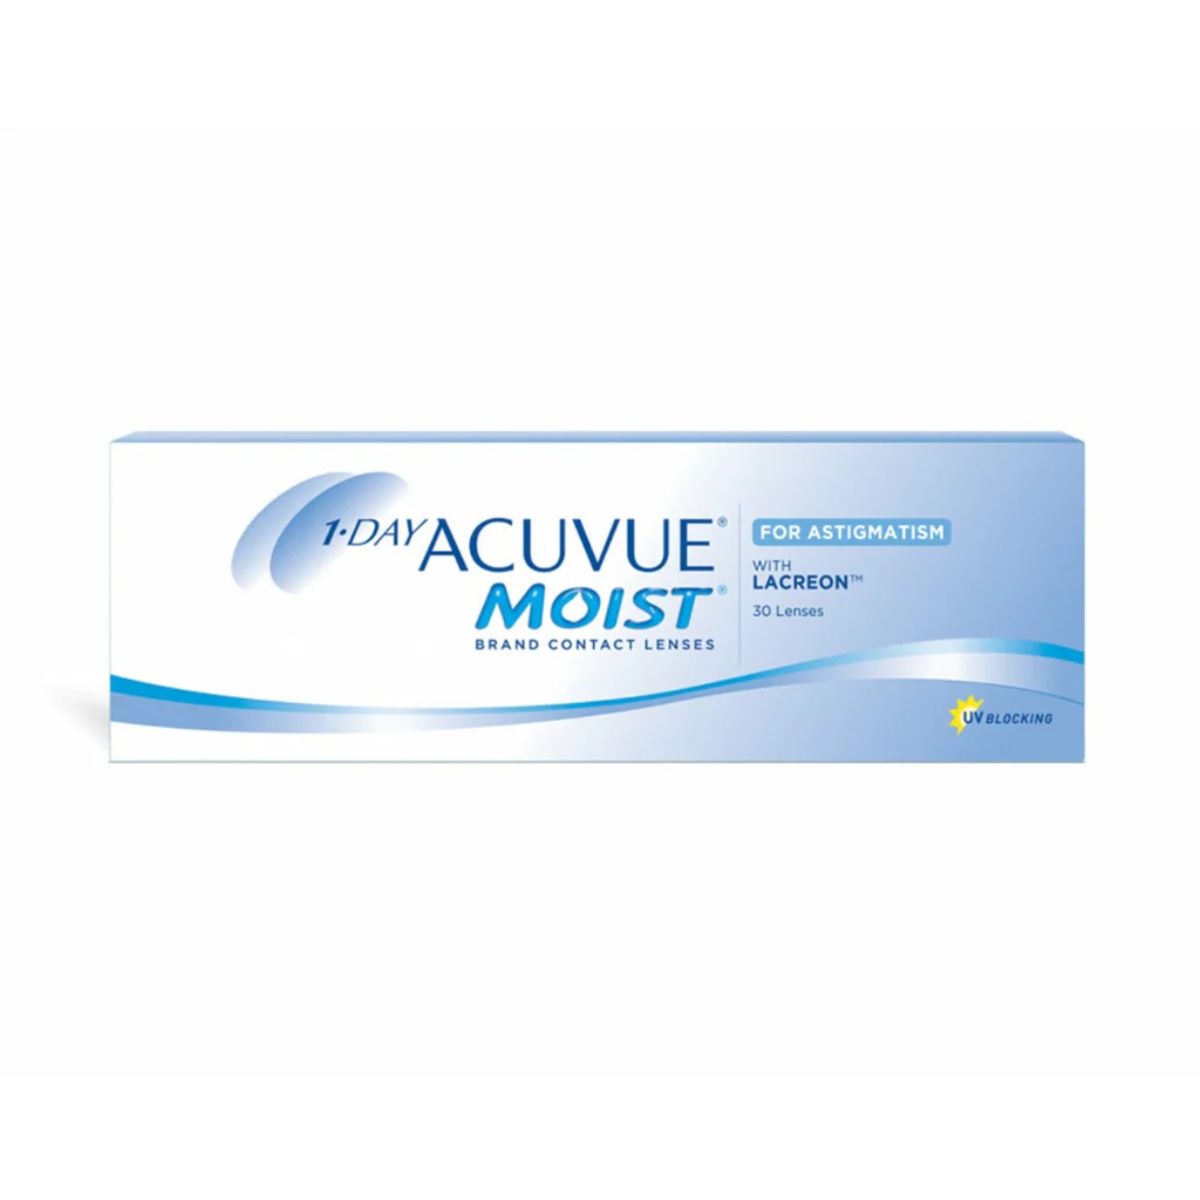 1-Day Acuvue Moist For Astigmatism (30 Lens Pack)